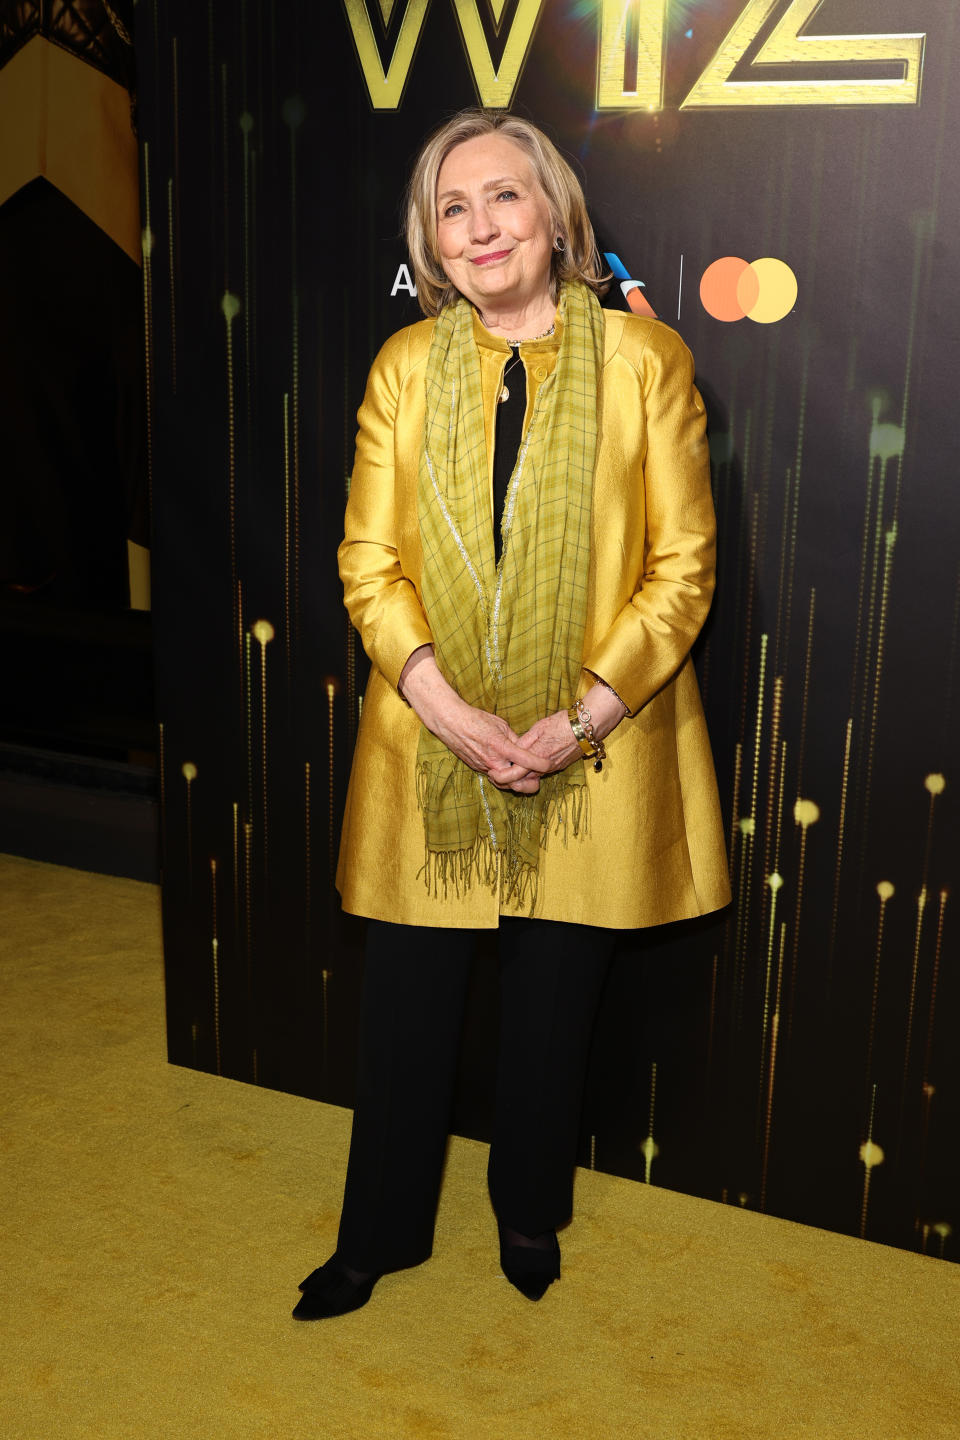 NEW YORK, NEW YORK - APRIL 17: Hillary Rodham Clinton attends the broadway opening night of "The Wiz" at Marquee Theatre on April 17, 2024 in New York City. (Photo by Jamie McCarthy/Getty Images)